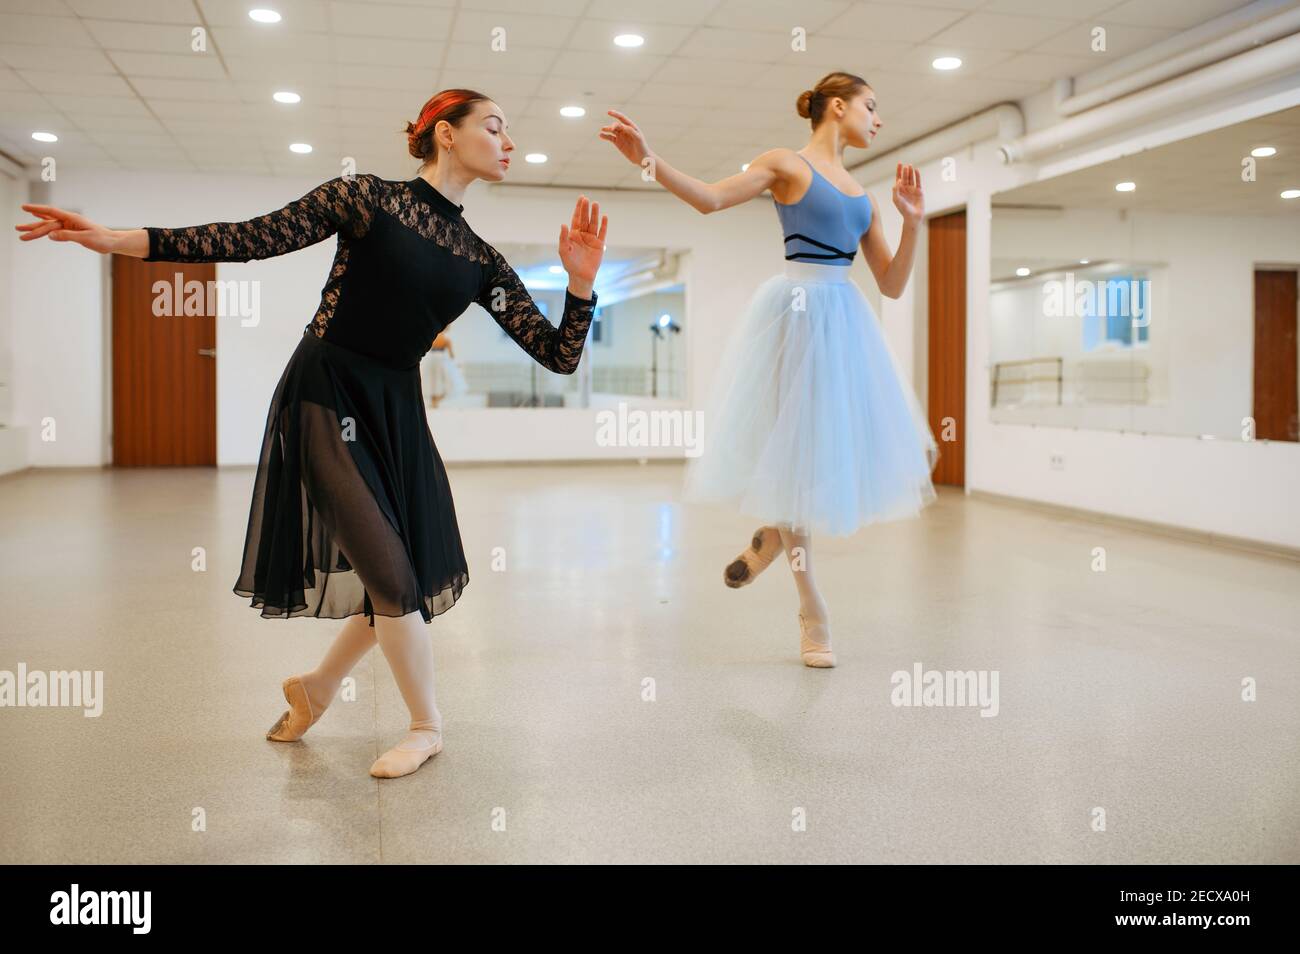 Choreographer works with young ballerina in class Stock Photo